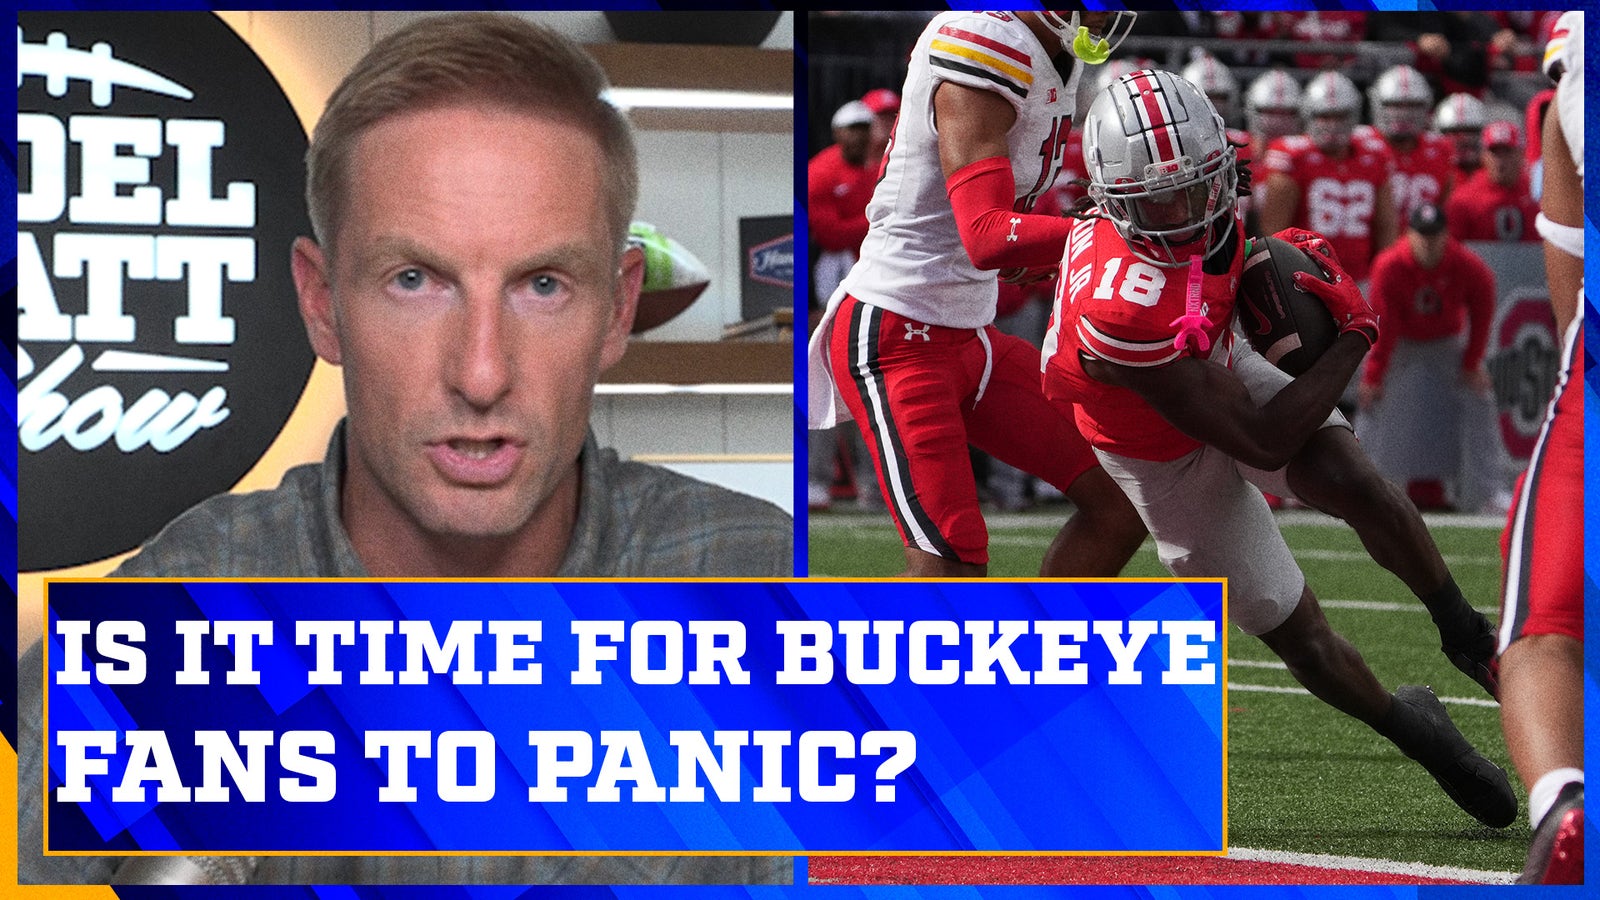 Should Ohio State be concerned about their 37-17 win over Maryland? 